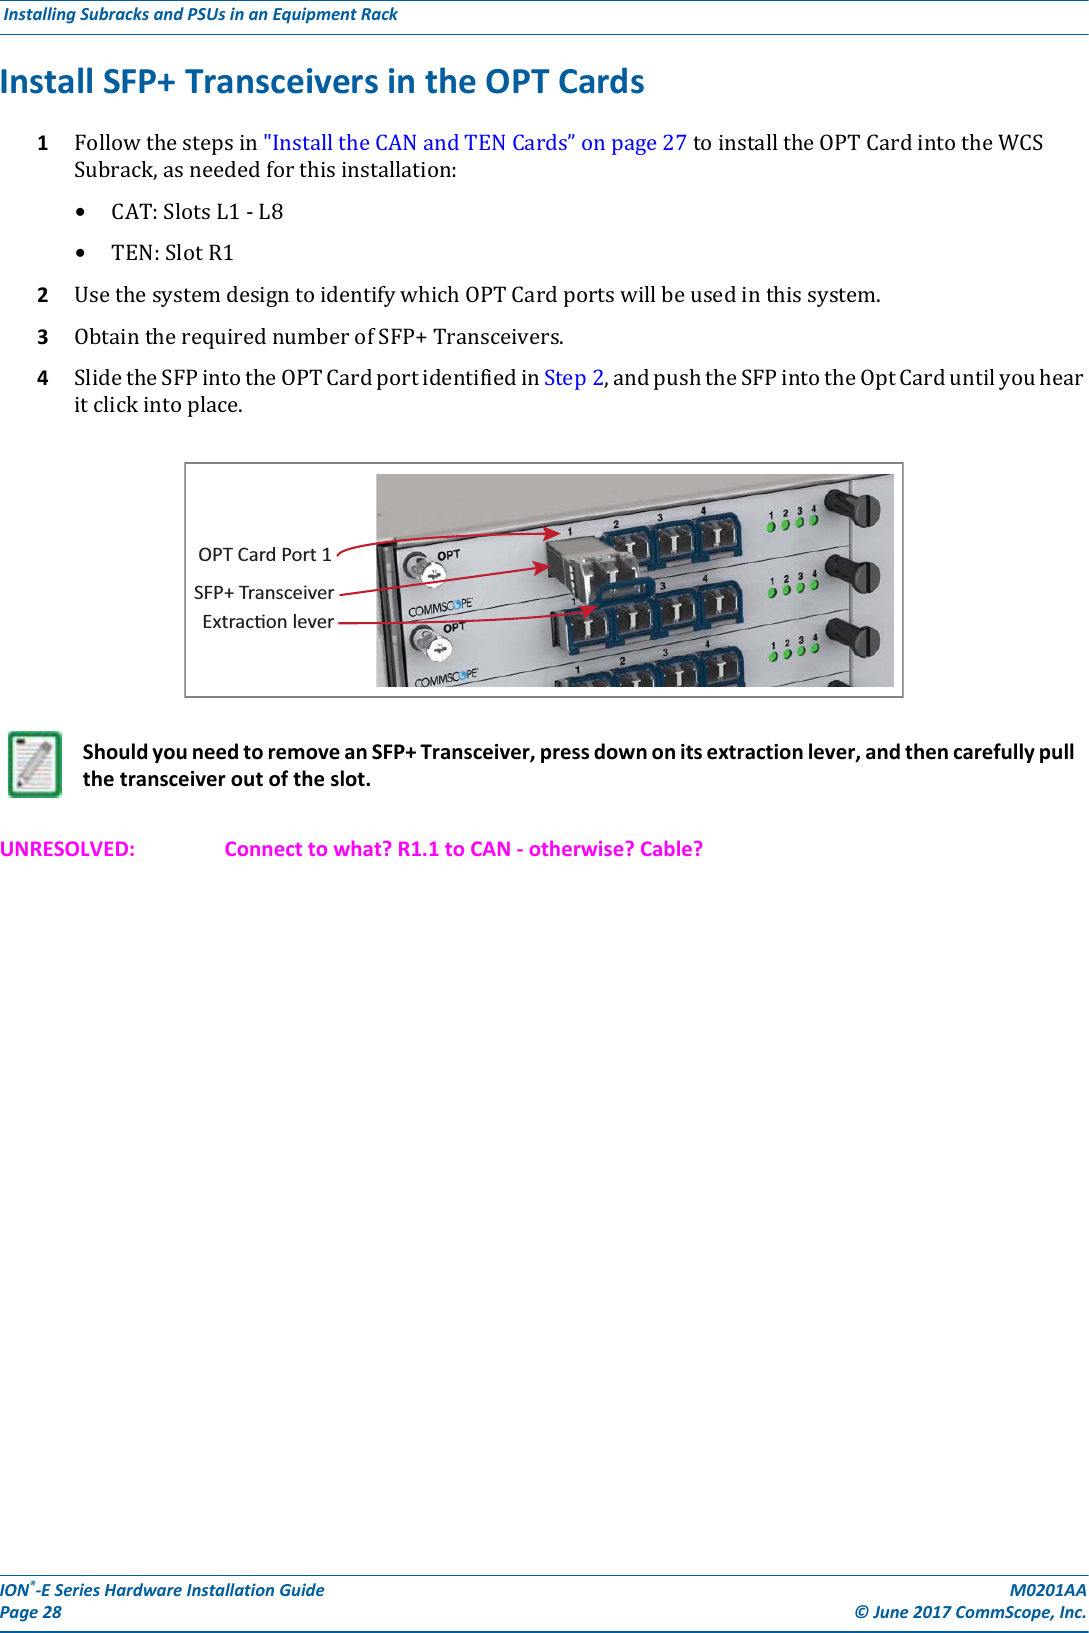 ION®-E Series Hardware Installation Guide M0201AA Page 28 © June 2017 CommScope, Inc. Installing Subracks and PSUs in an Equipment Rack  Install SFP+ Transceivers in the OPT Cards1Followthestepsin&quot;InstalltheCANandTENCards”onpage27toinstalltheOPTCardintotheWCSSubrack,asneededforthisinstallation:•CAT:SlotsL1-L8•TEN:SlotR12UsethesystemdesigntoidentifywhichOPTCardportswillbeusedinthissystem.3ObtaintherequirednumberofSFP+Transceivers.4SlidetheSFPintotheOPTCardportidentifiedinStep2,andpushtheSFPintotheOptCarduntilyouhearitclickintoplace.UNRESOLVED: Connect to what? R1.1 to CAN - otherwise? Cable?Should you need to remove an SFP+ Transceiver, press down on its extraction lever, and then carefully pull the transceiver out of the slot.SFP+ TransceiverExtracon leverOPT Card Port 1